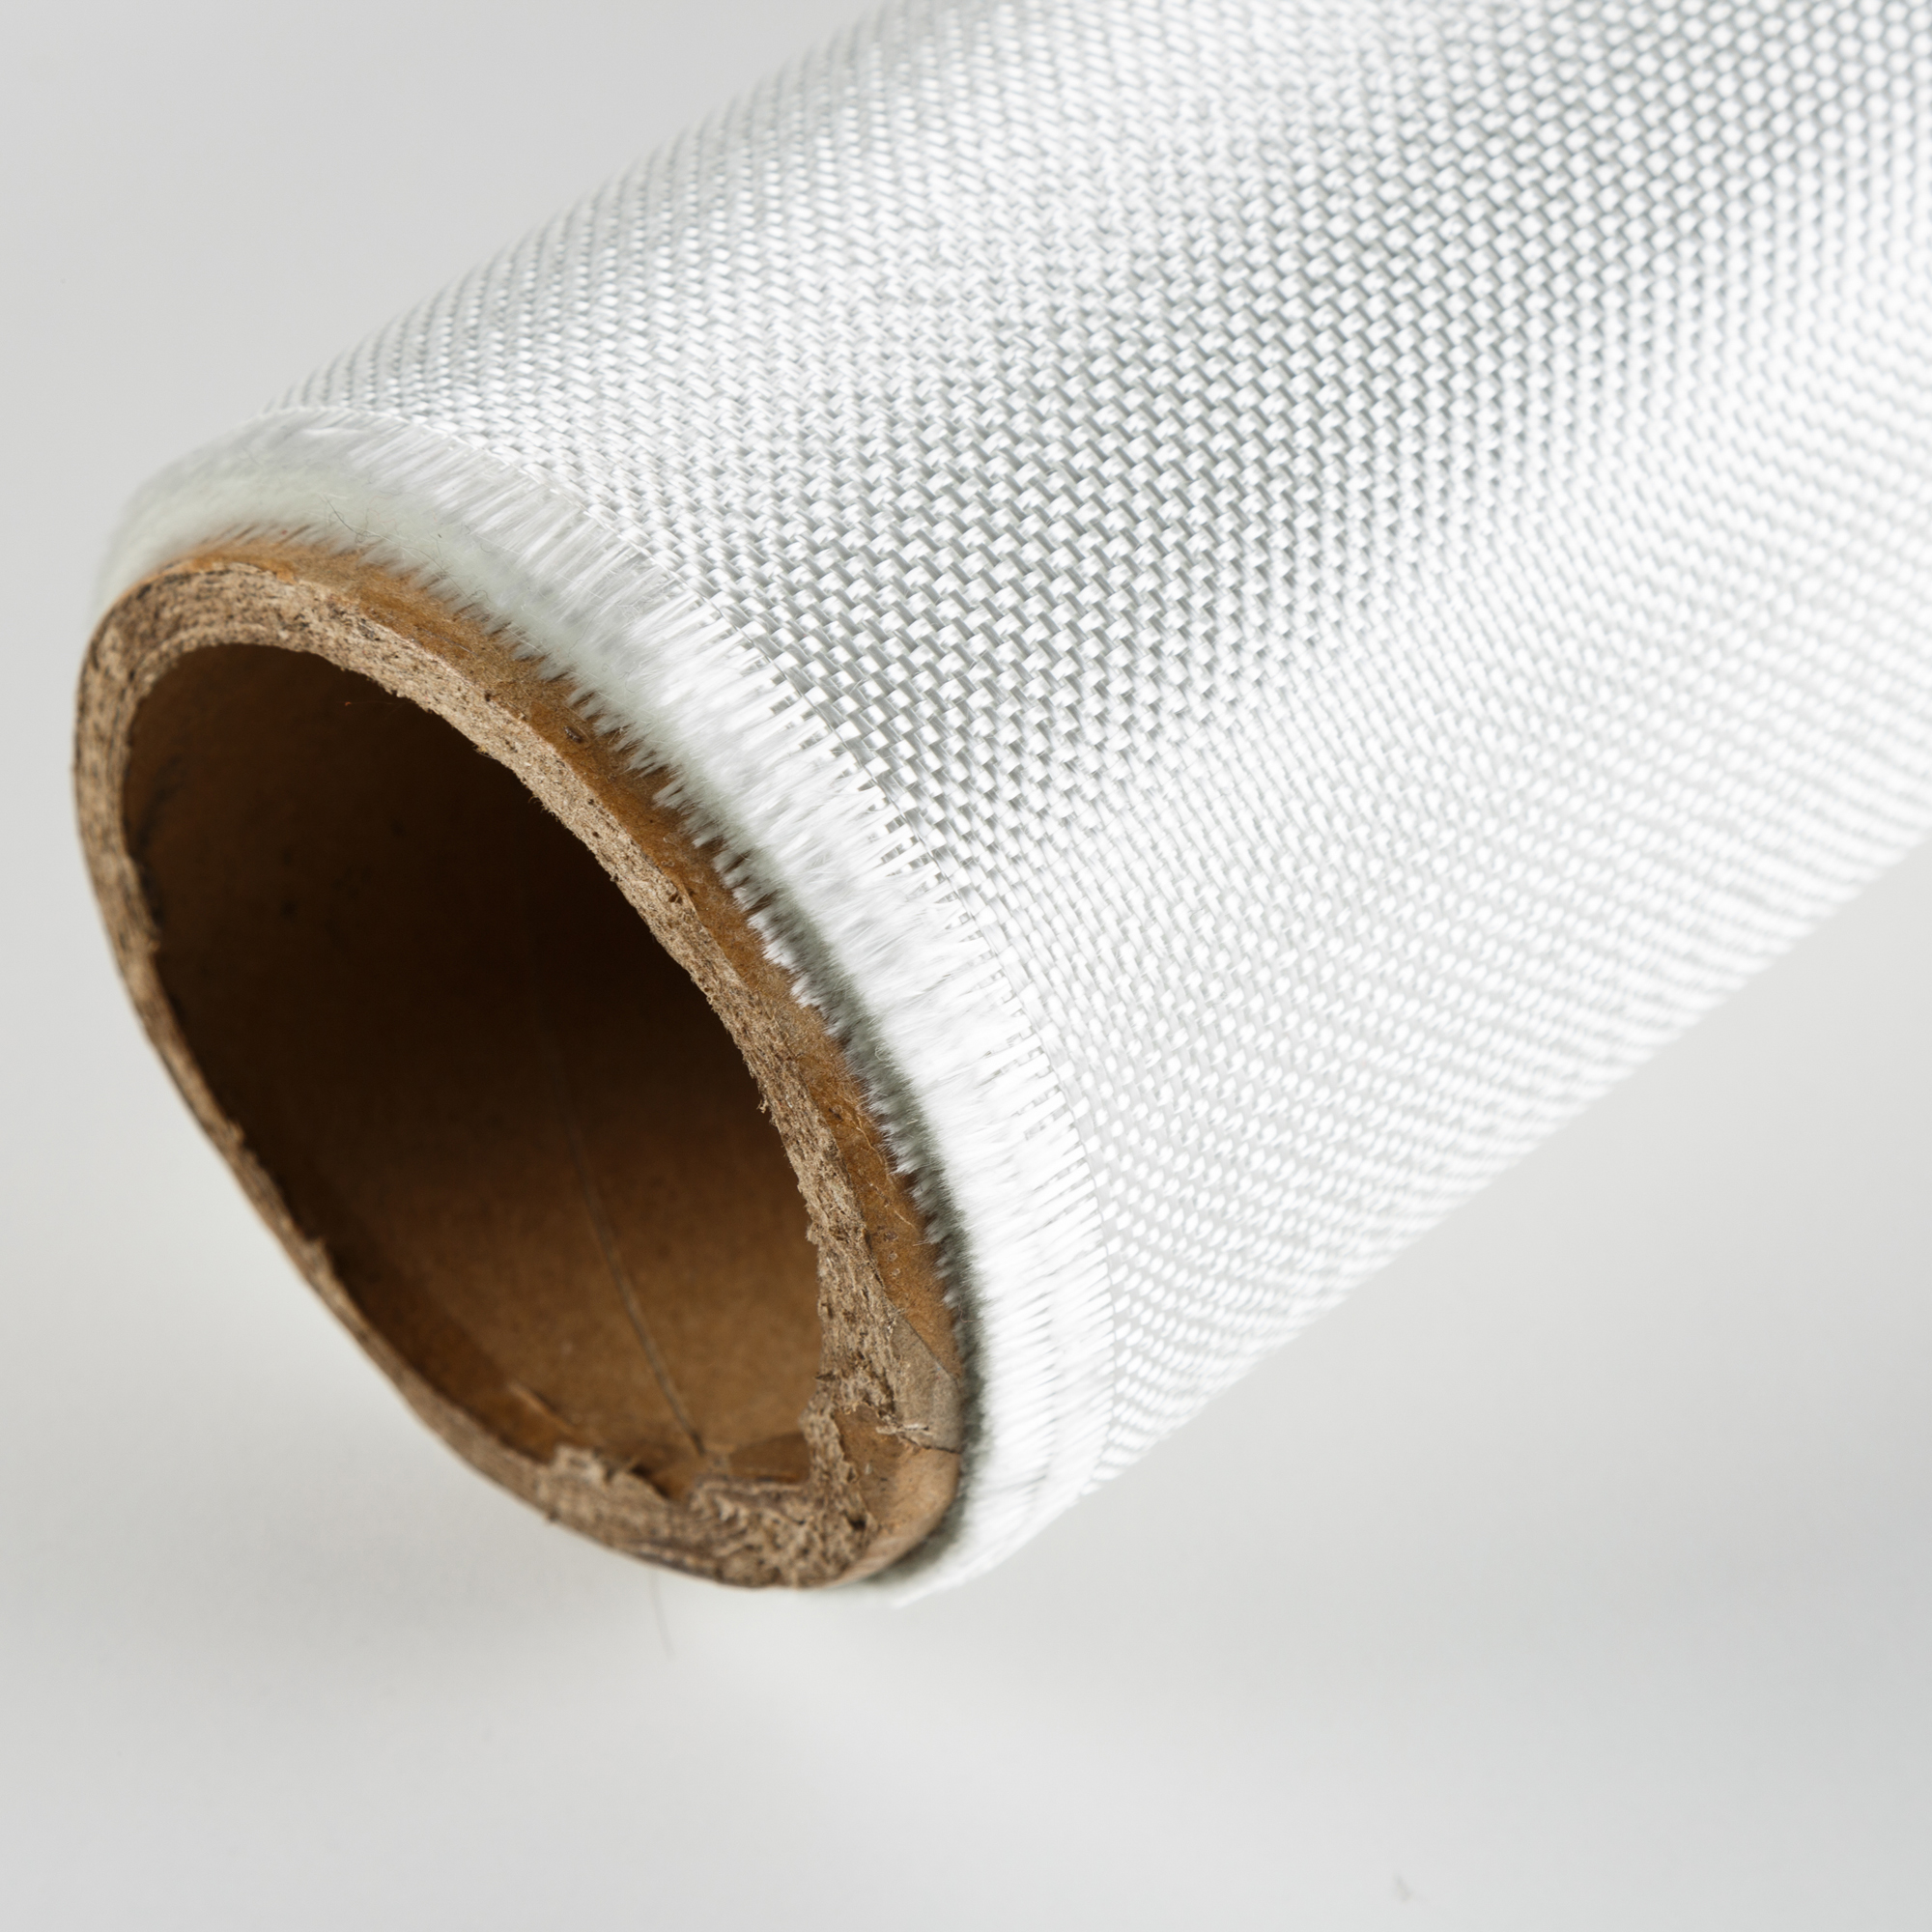 Excellent Dimensional Stability and Surface Flat Fiberglass Plain Cloth